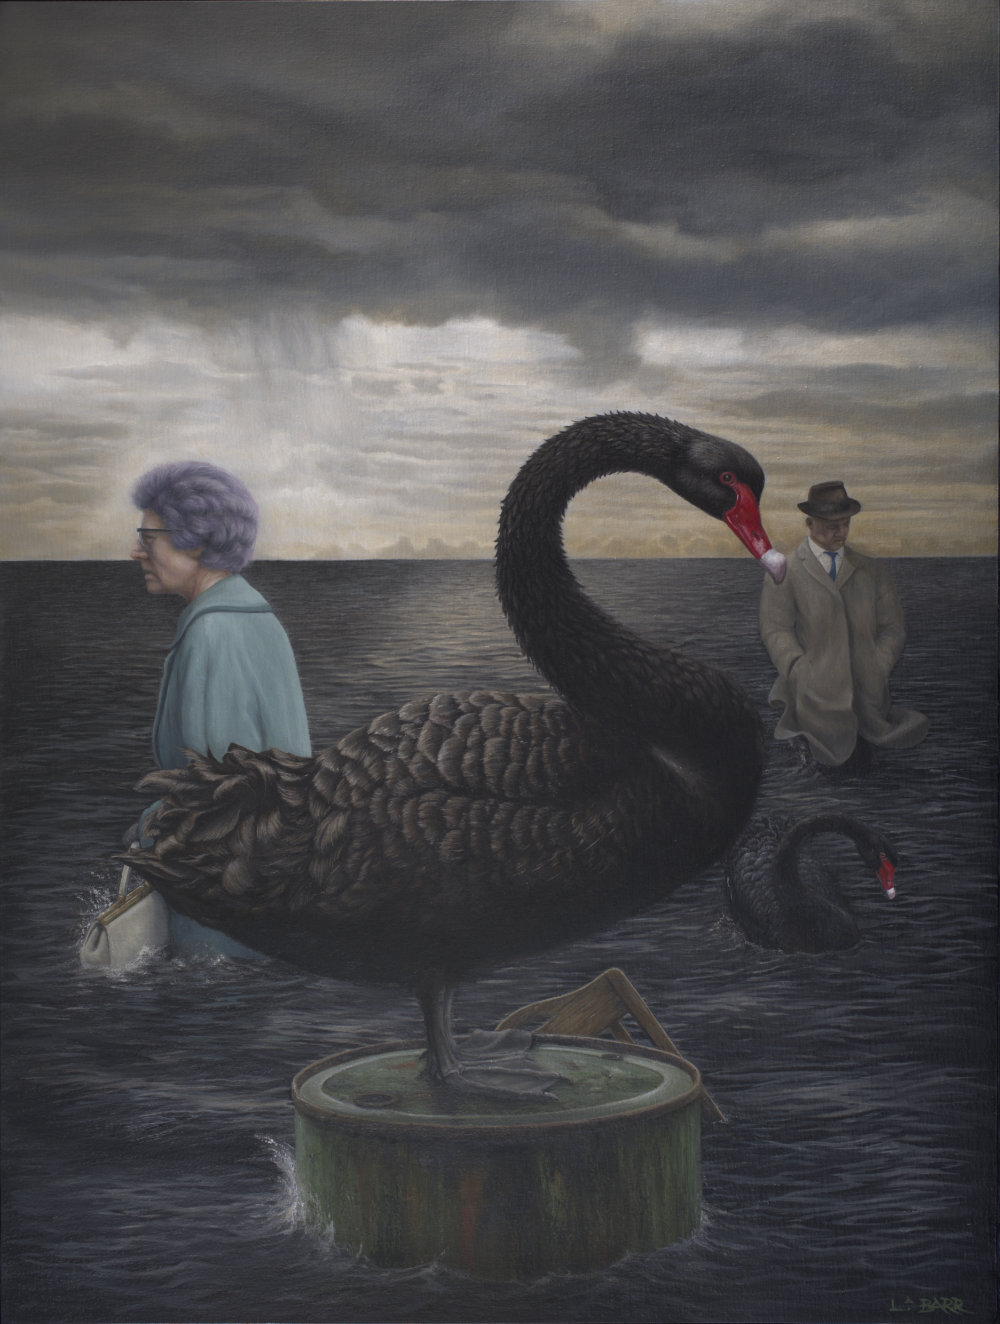 Painting of a swan standing on an oil drum.